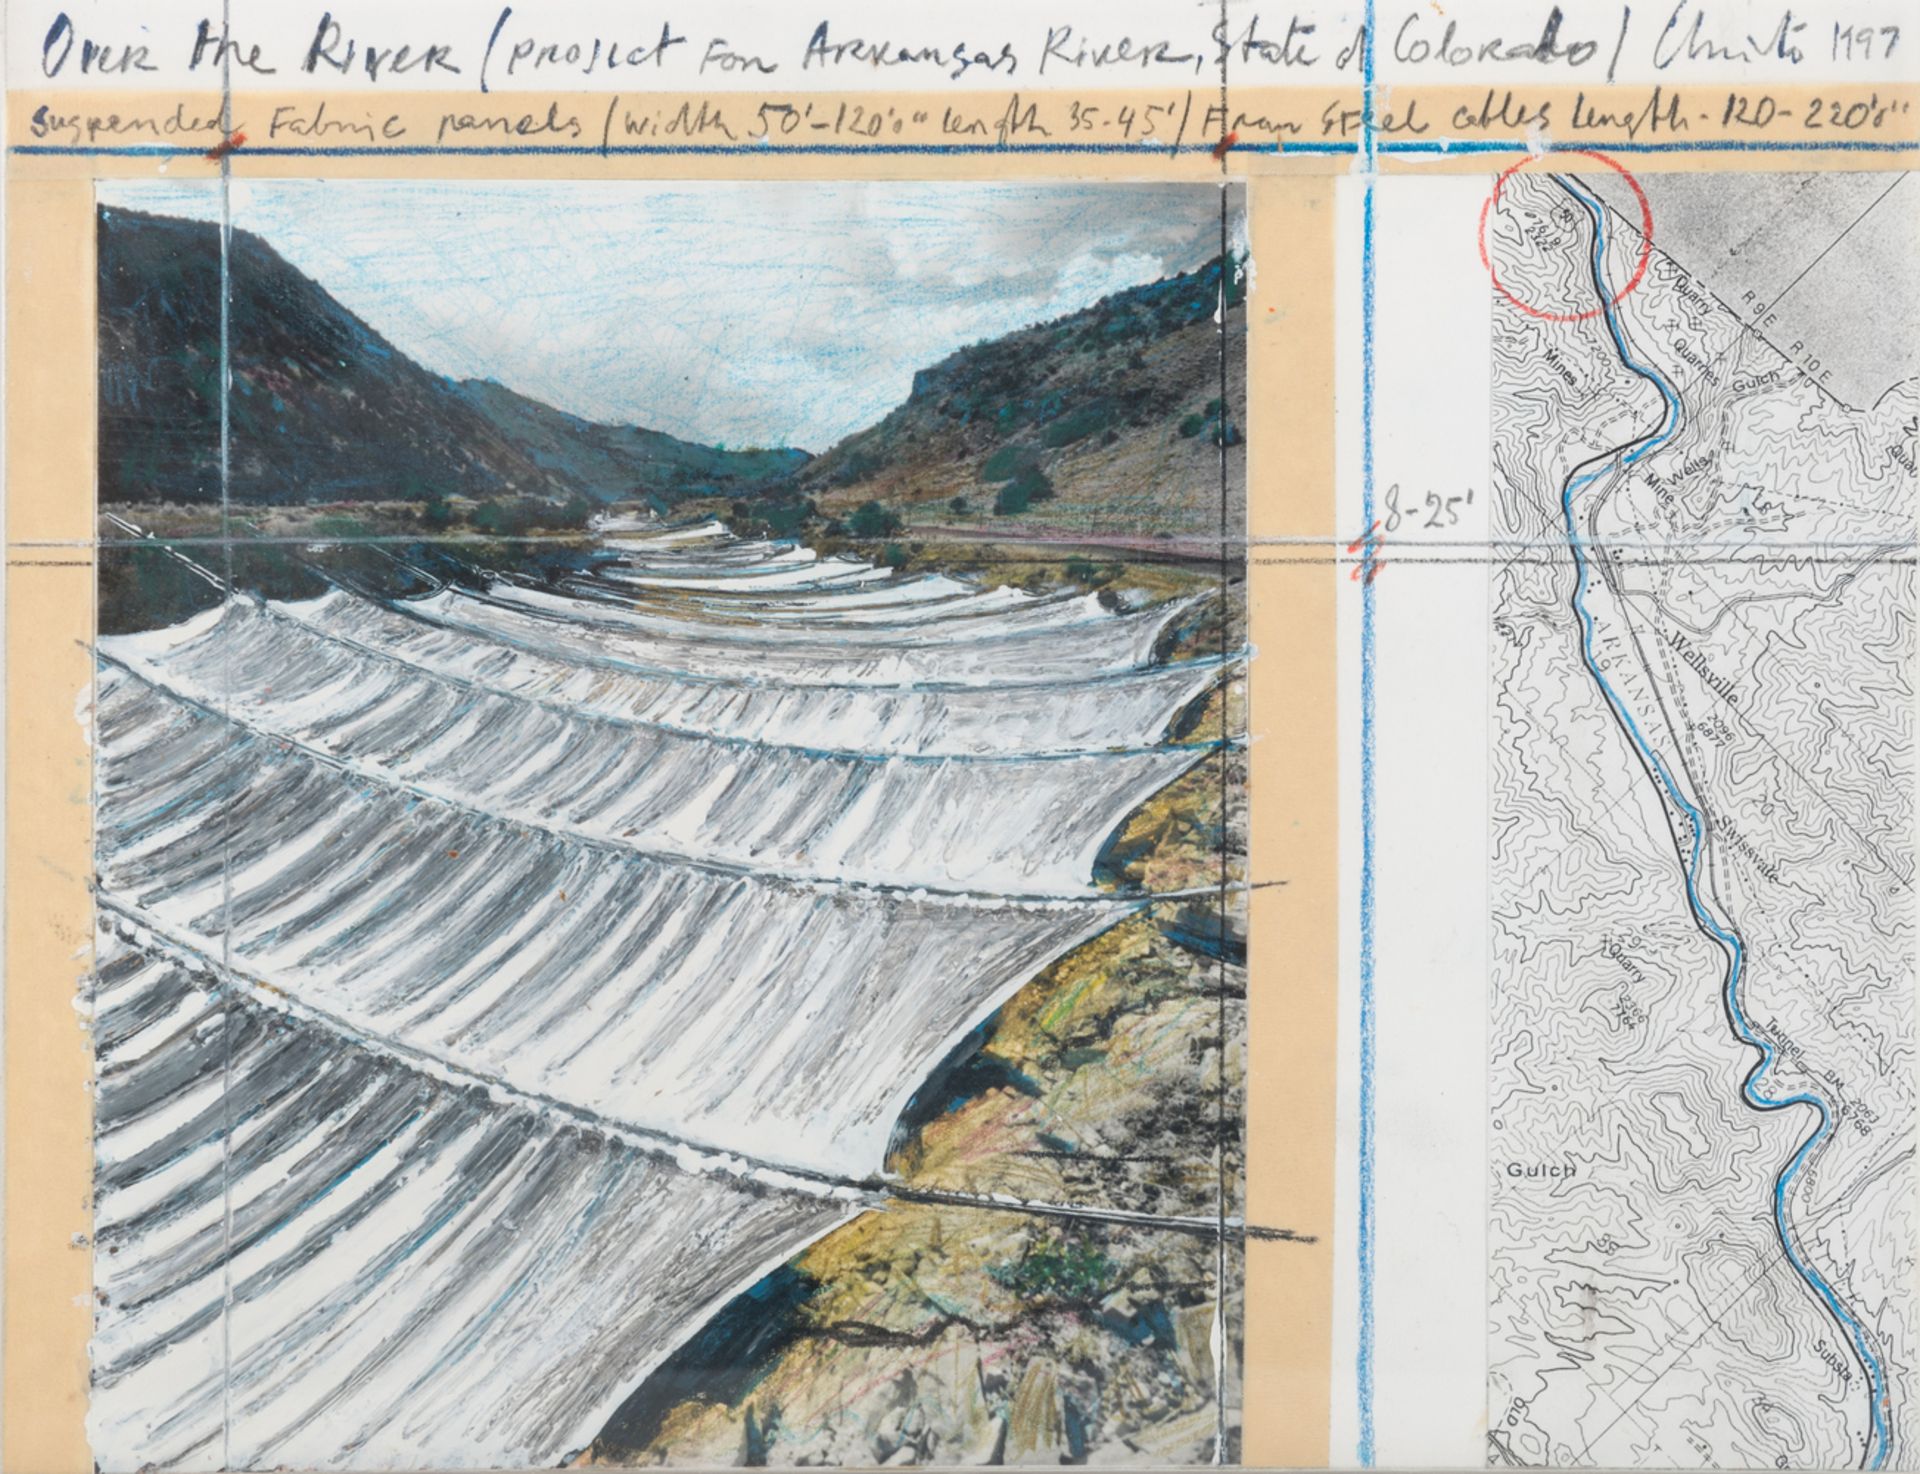 Christo, 'Over the River 1997 (Project for Arkansas River, State of Colorado)', mixed media - worked